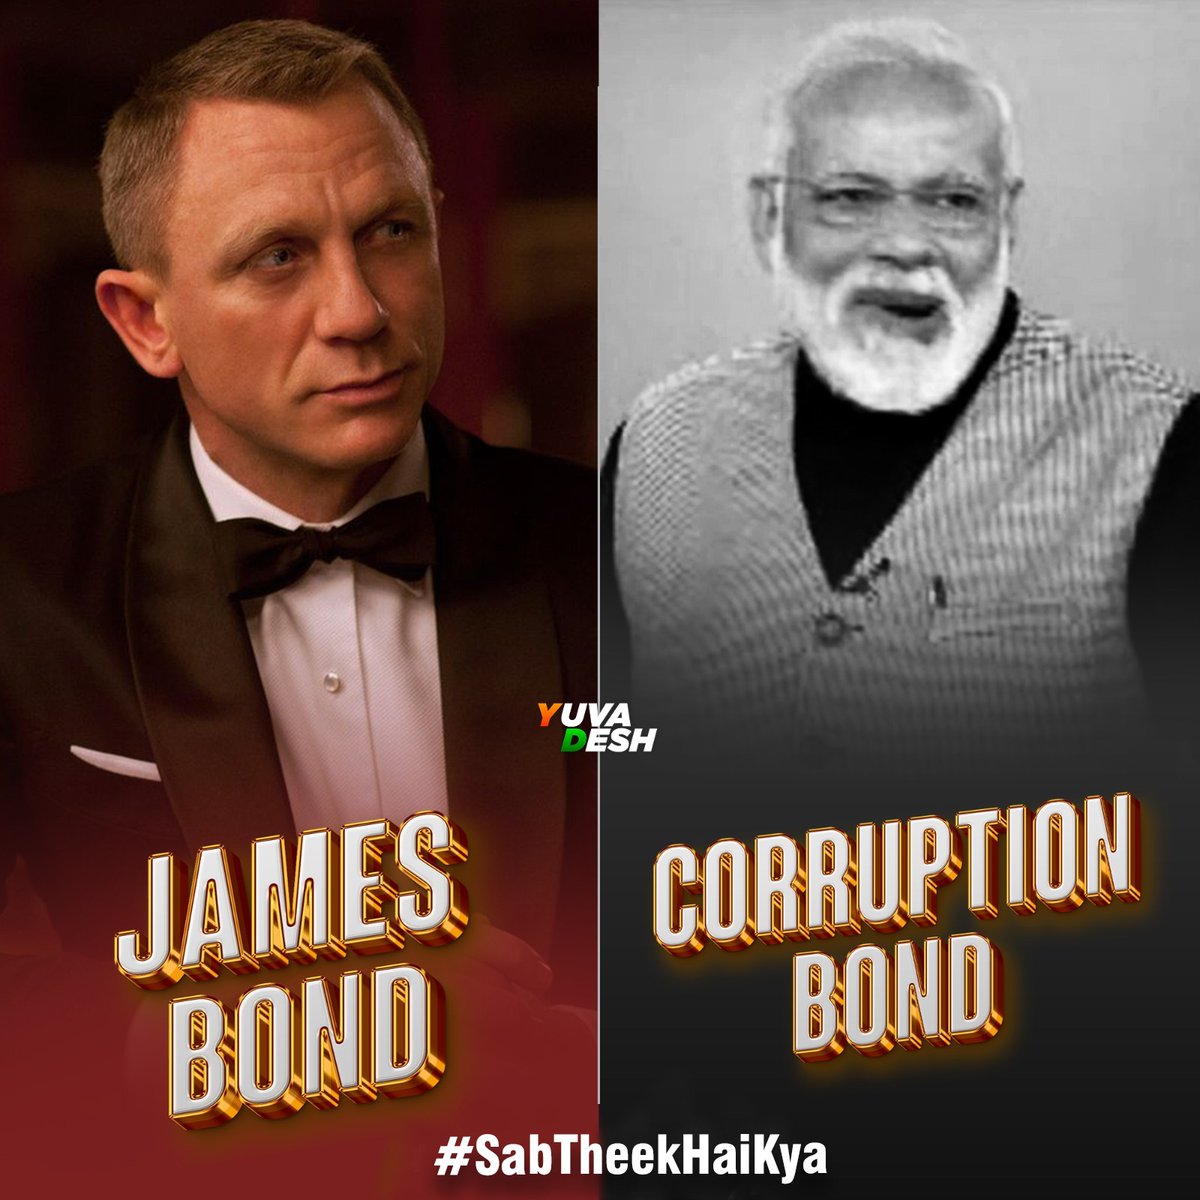 From election bond to Adani scam. The PM is becoming a new face for scanning people. 

#SabTheekHaiKya